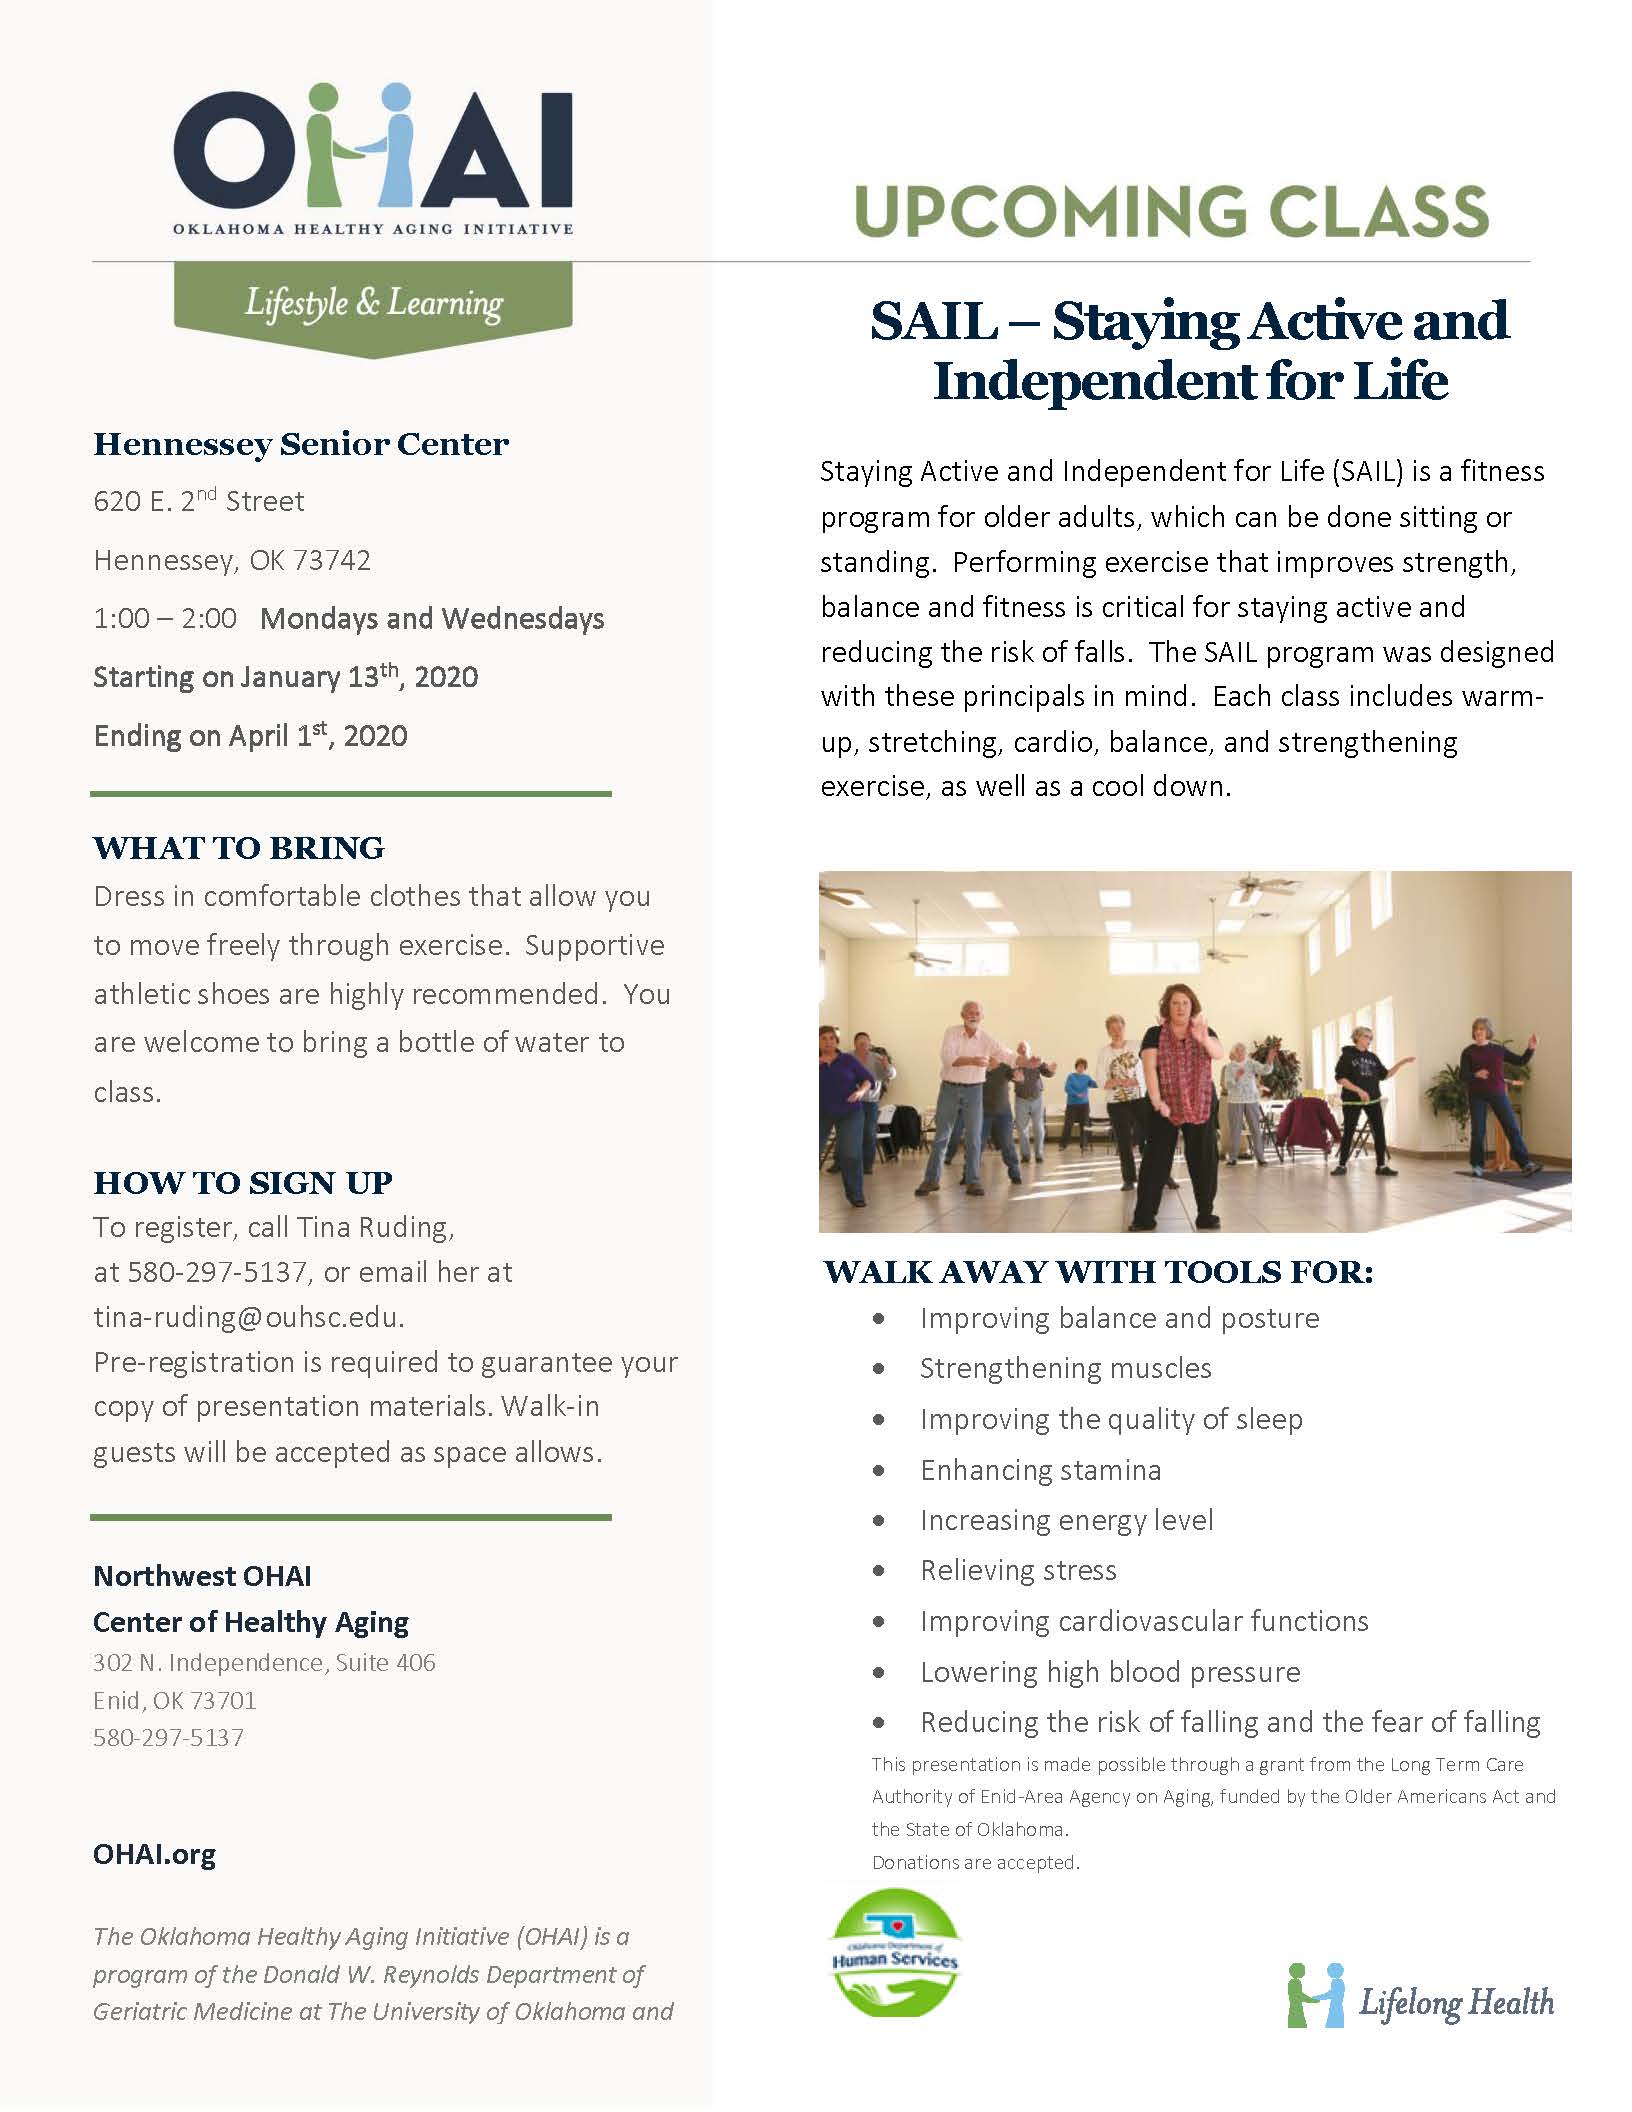 SAIL – Staying Active and Independent for Life at HENNESSEY SENIOR CITIZEN CENTER